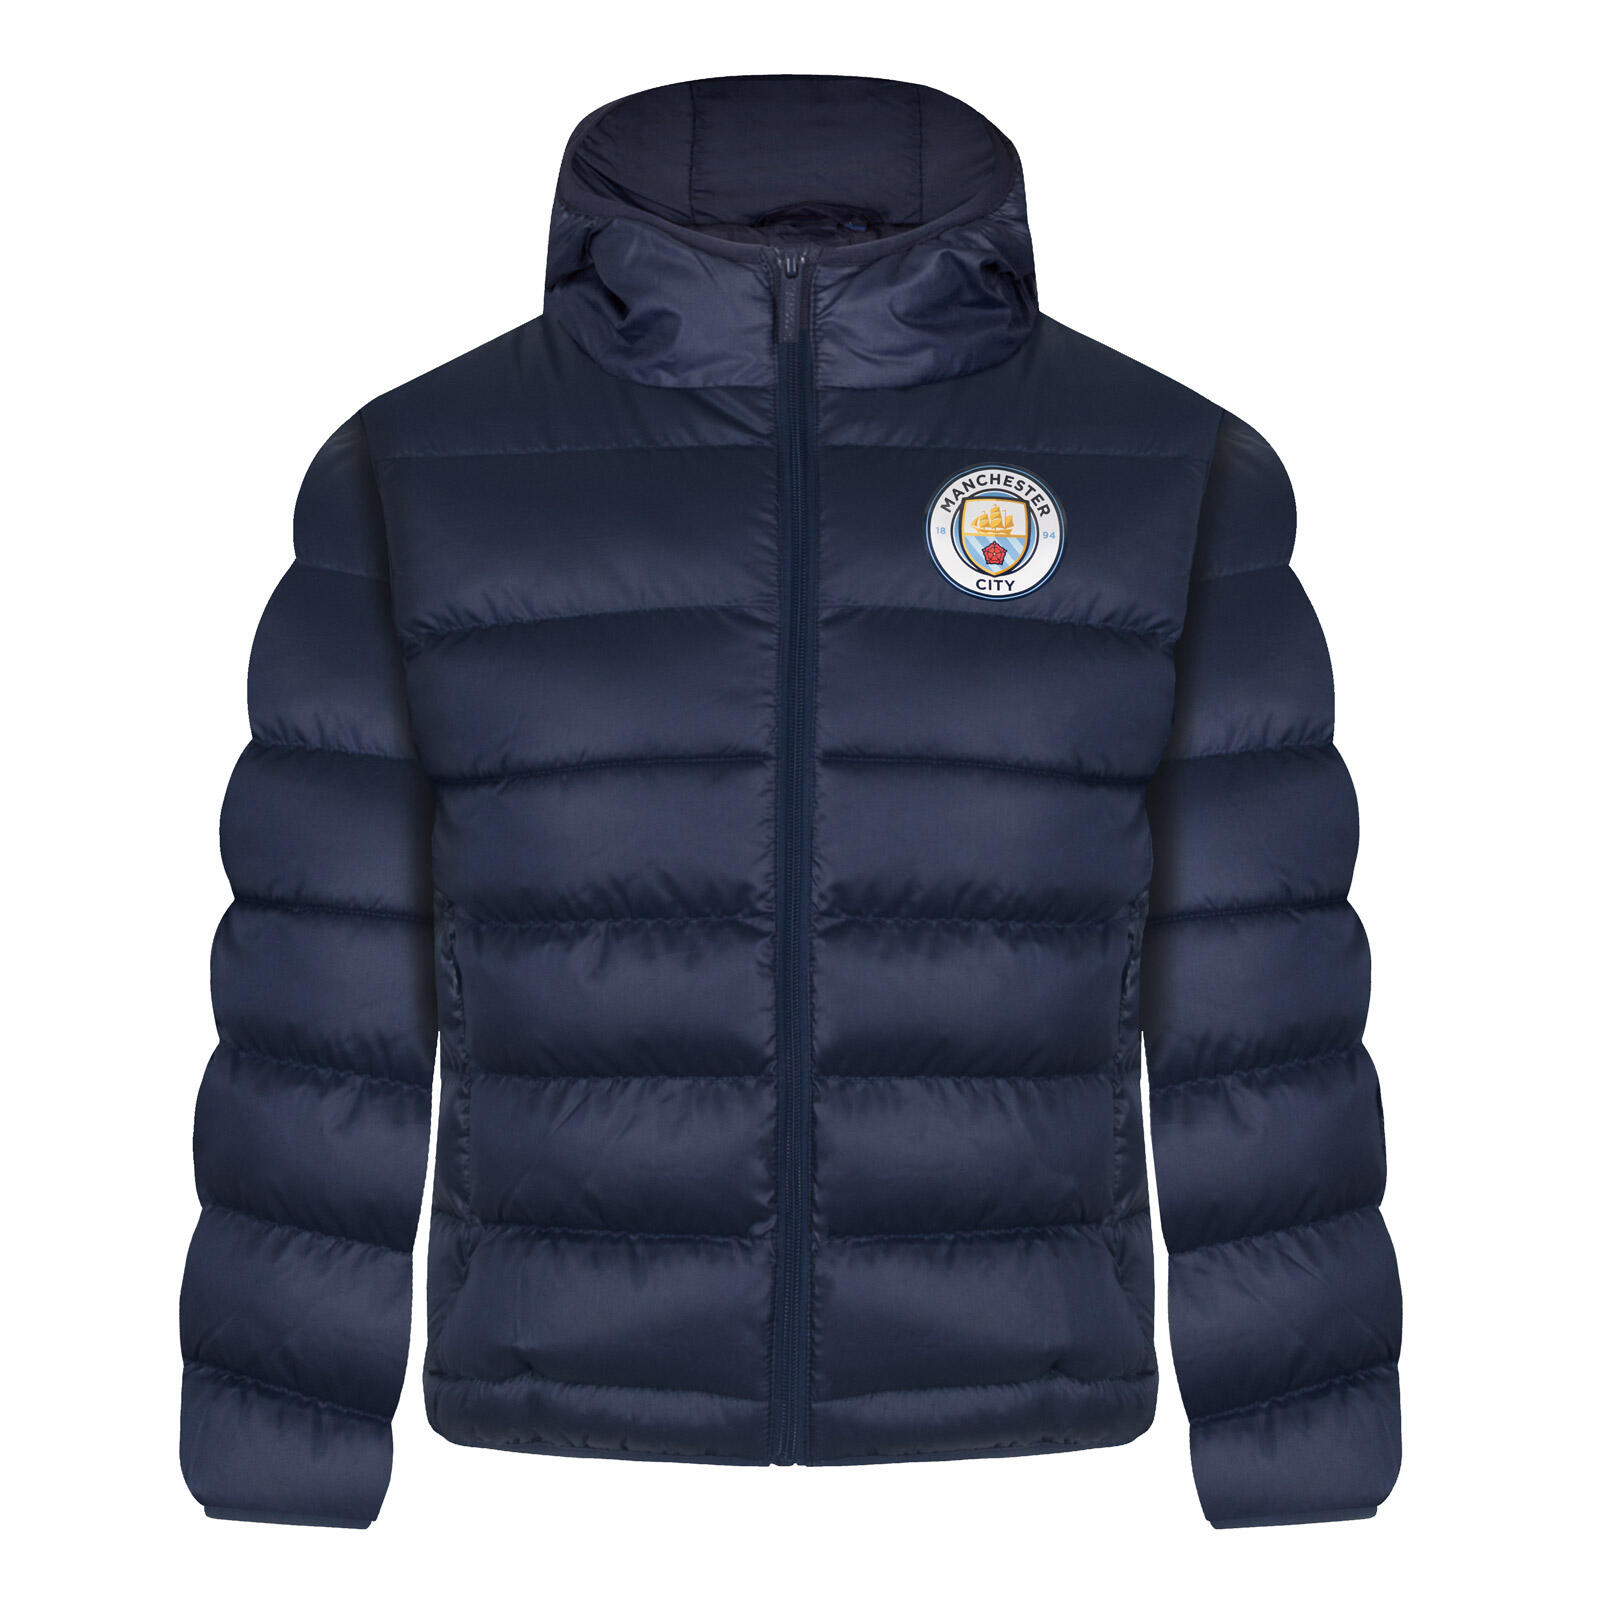 Manchester City Boys Jacket Hooded Winter Quilted Kids OFFICIAL Football Gift 1/5